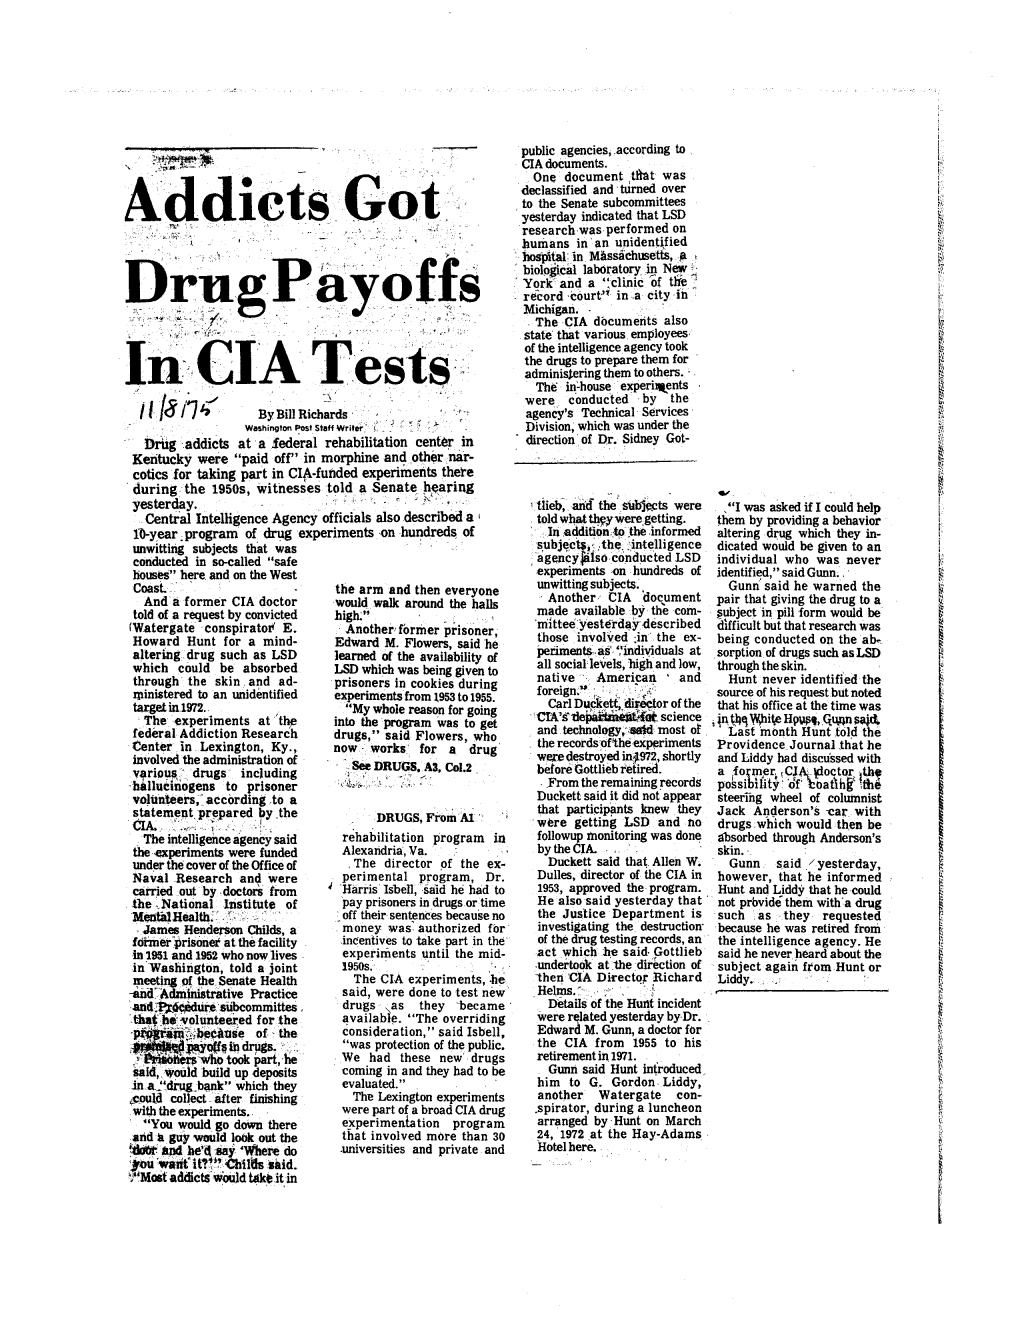 Addicts Drug Ayoffs in CIA Ests